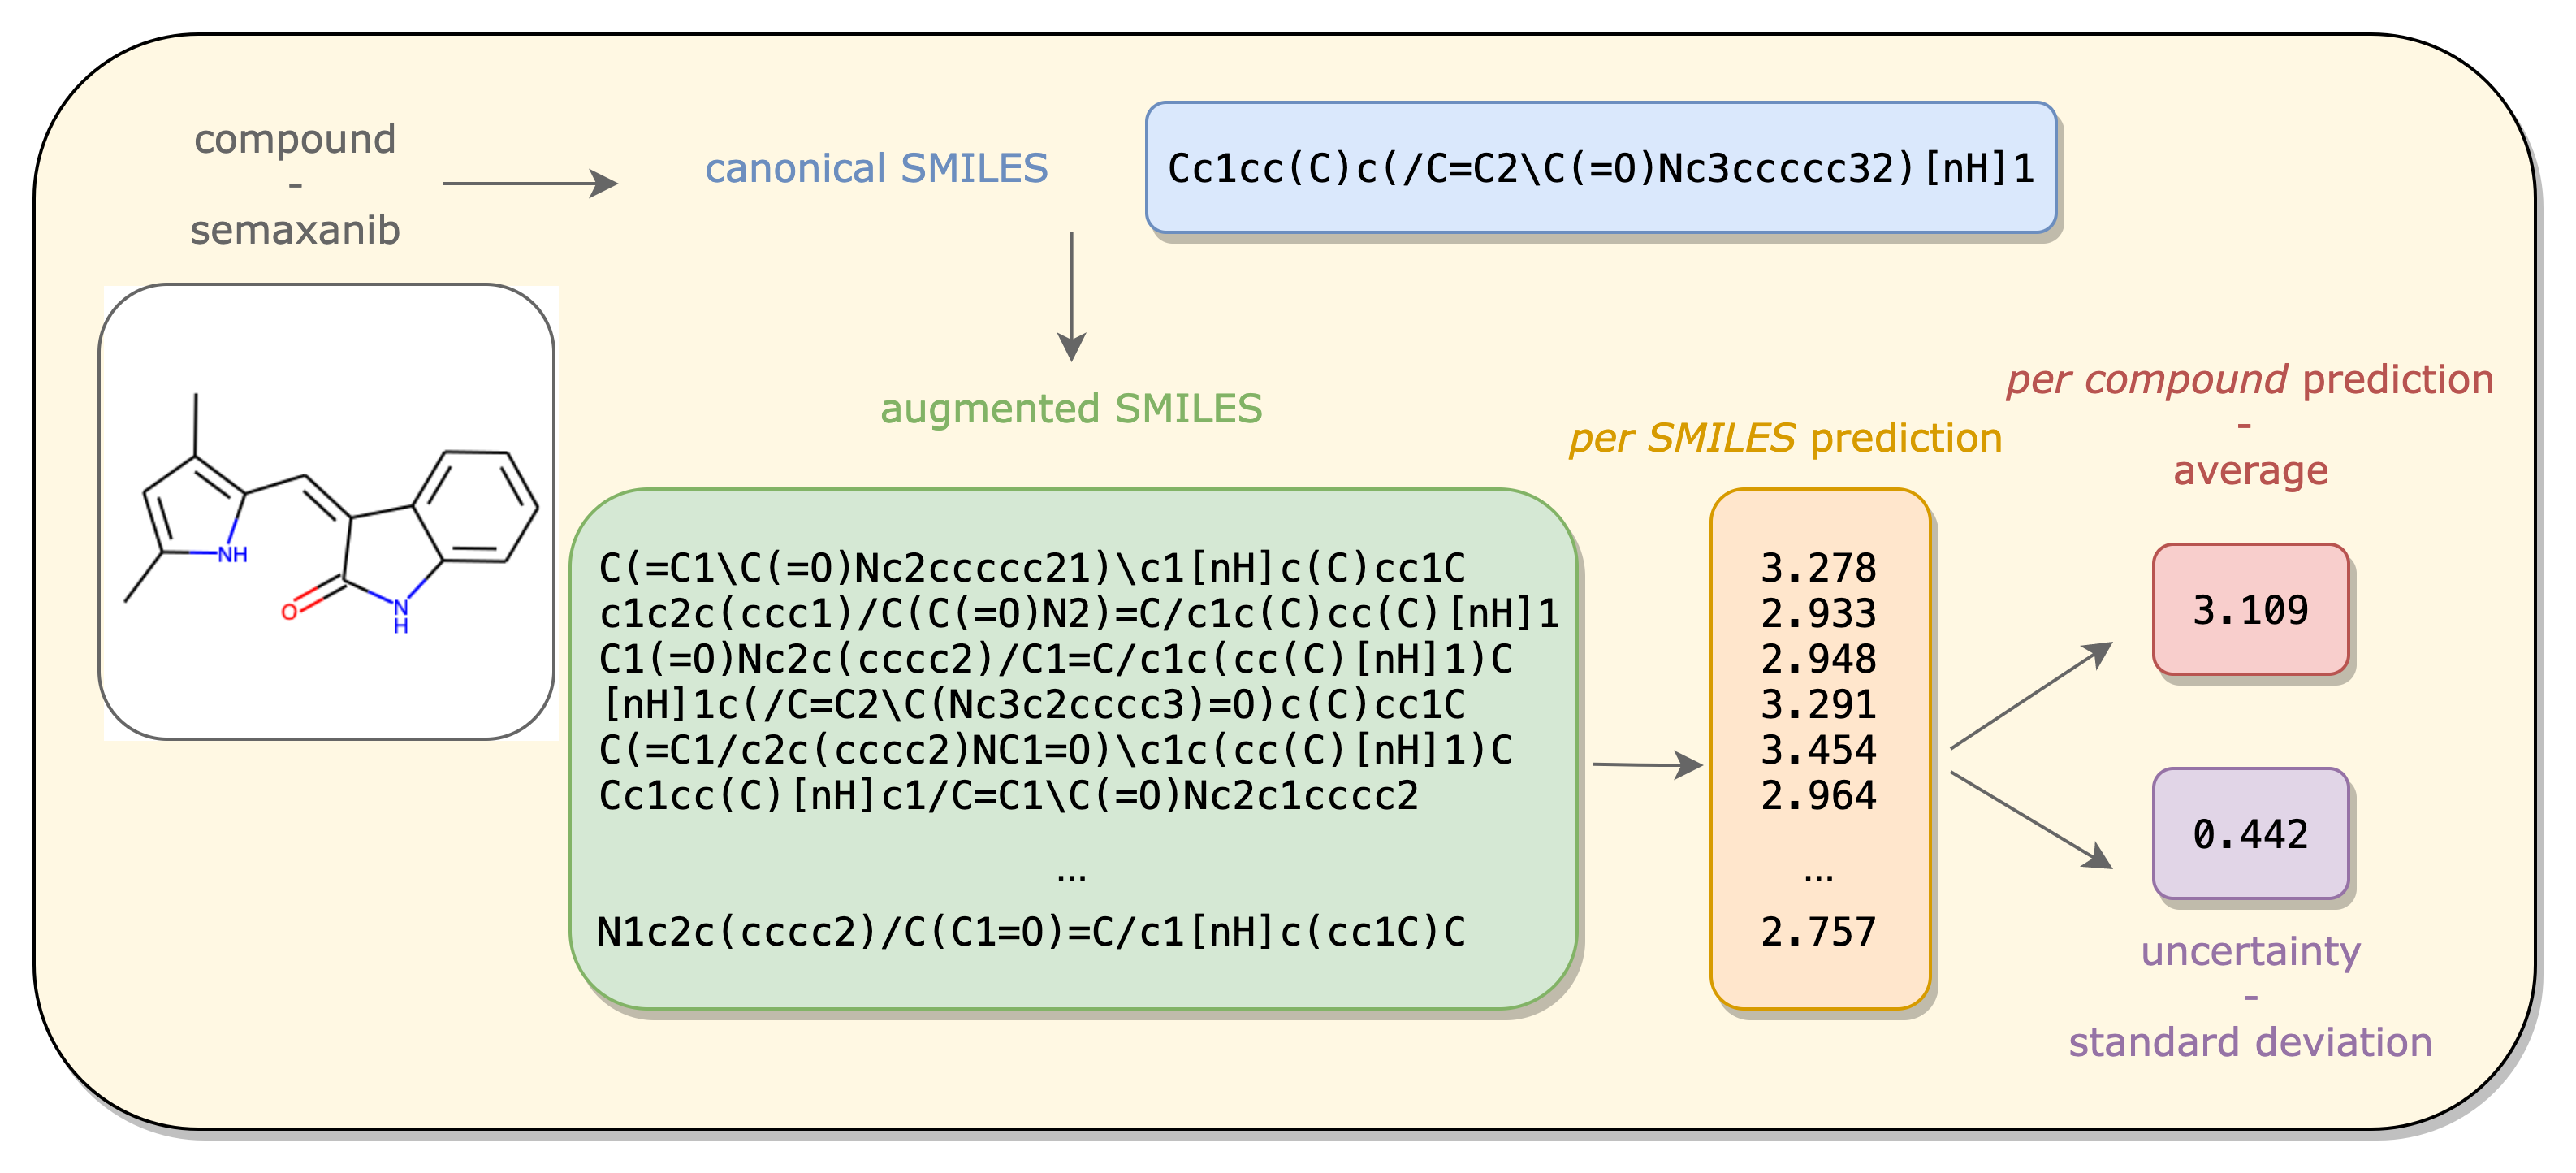 Given a compound represented by its canonical SMILES, the Maxsmi model produces a prediction for each of the SMILES variations. The aggregation of these values leads to a per compound prediction and the standard deviation to an uncertainty in the prediction. The Maxsmi model predicts lipophilicity of semaxanib to 3.109, with an uncertainty of 0.442. The figure is taken from Kimber, 2021.